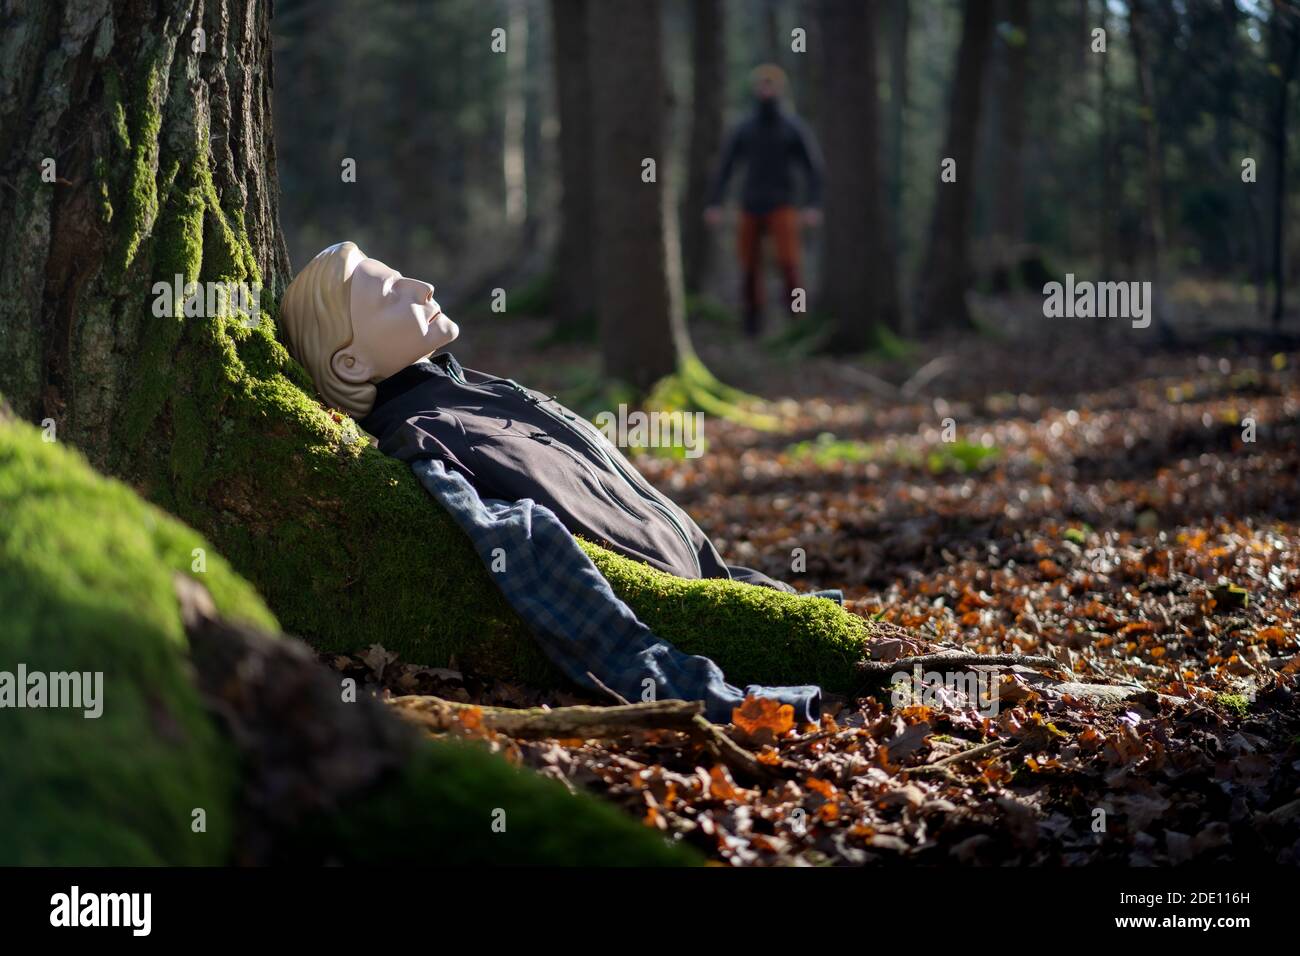 Resuscitation training during intensive wilderness first aid course in Europe Stock Photo